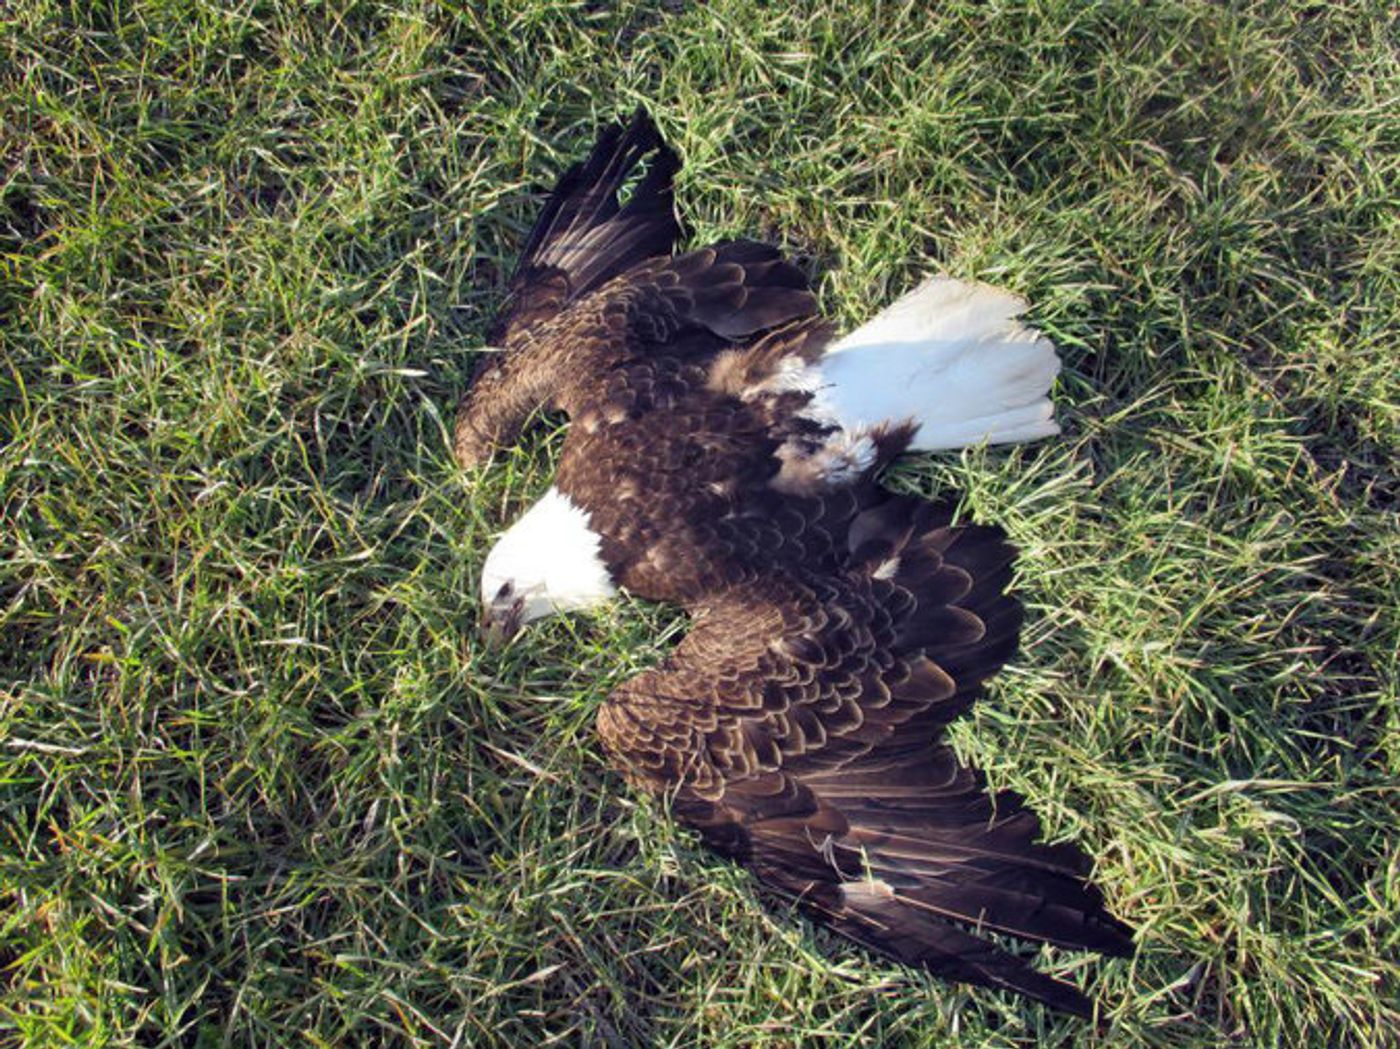 13 American Bald Eagles have been found dead in Maryland. Investigations are still pending results.